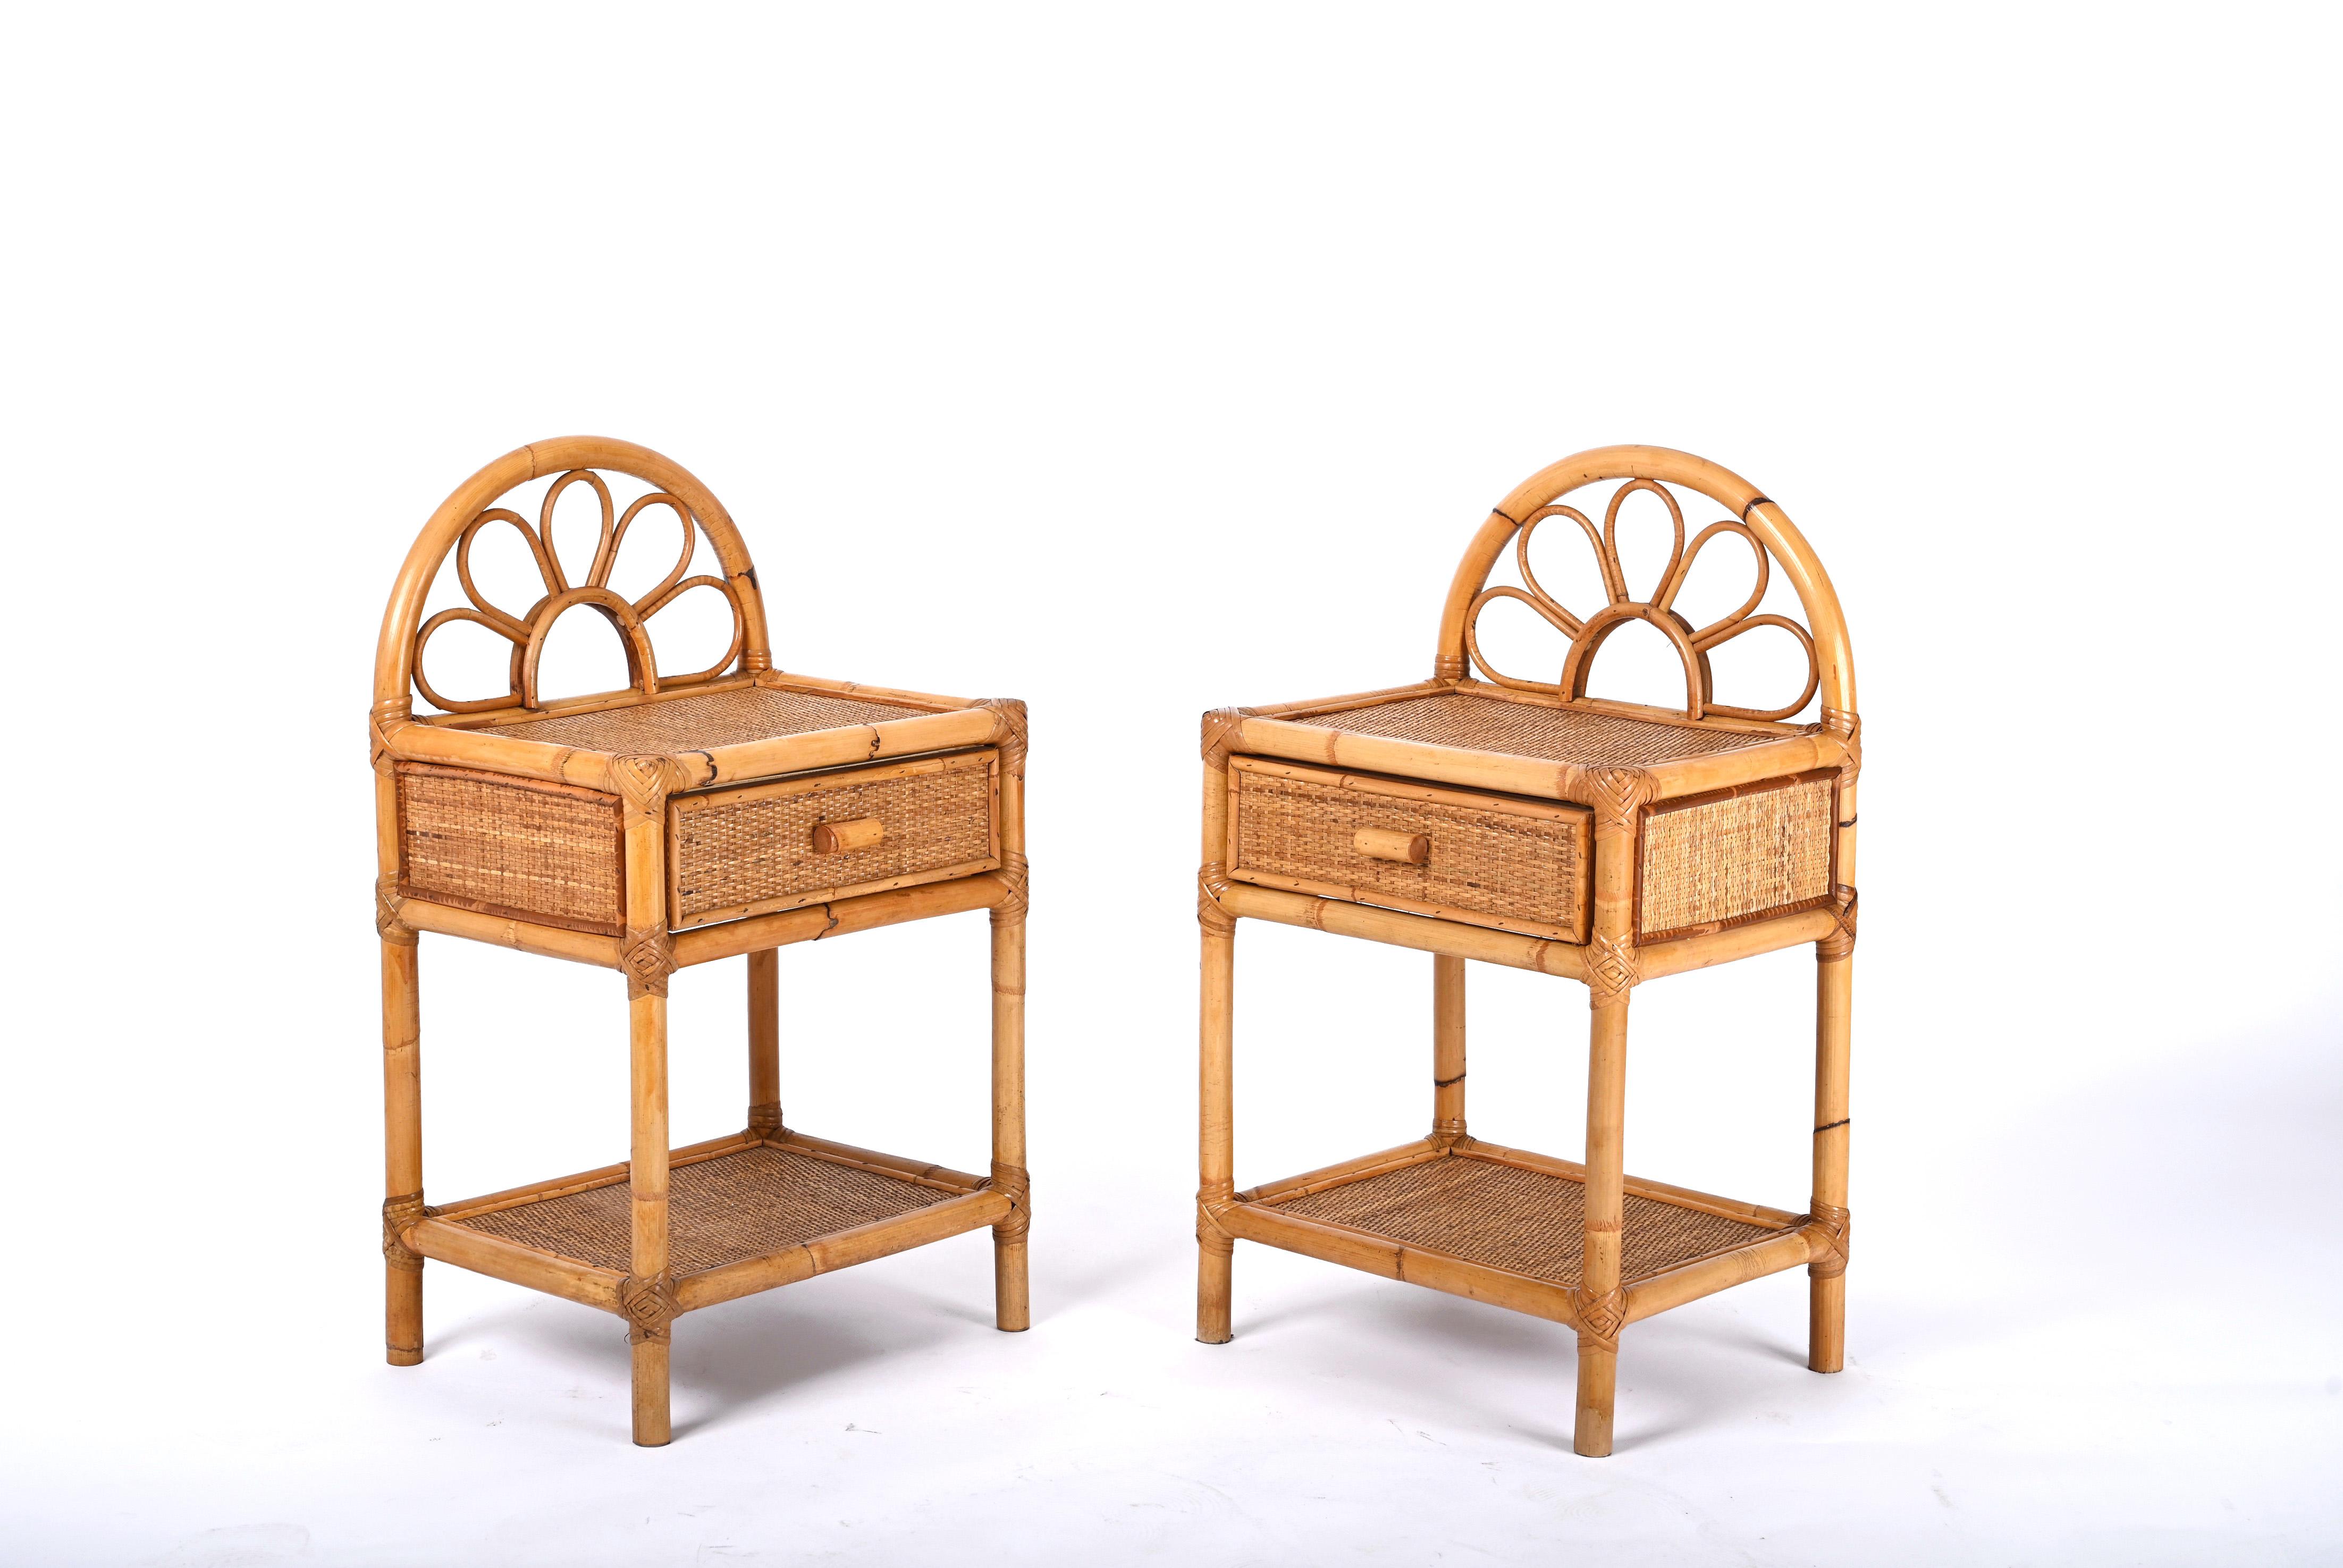 Incredible pair of Mid-Century Modern bamboo and rattan bedside tables. These fantastic pieces were designed in Italy during the 1970s.

The key features of this wonderful set are the beautiful rationalist straight lines, improved by using natural